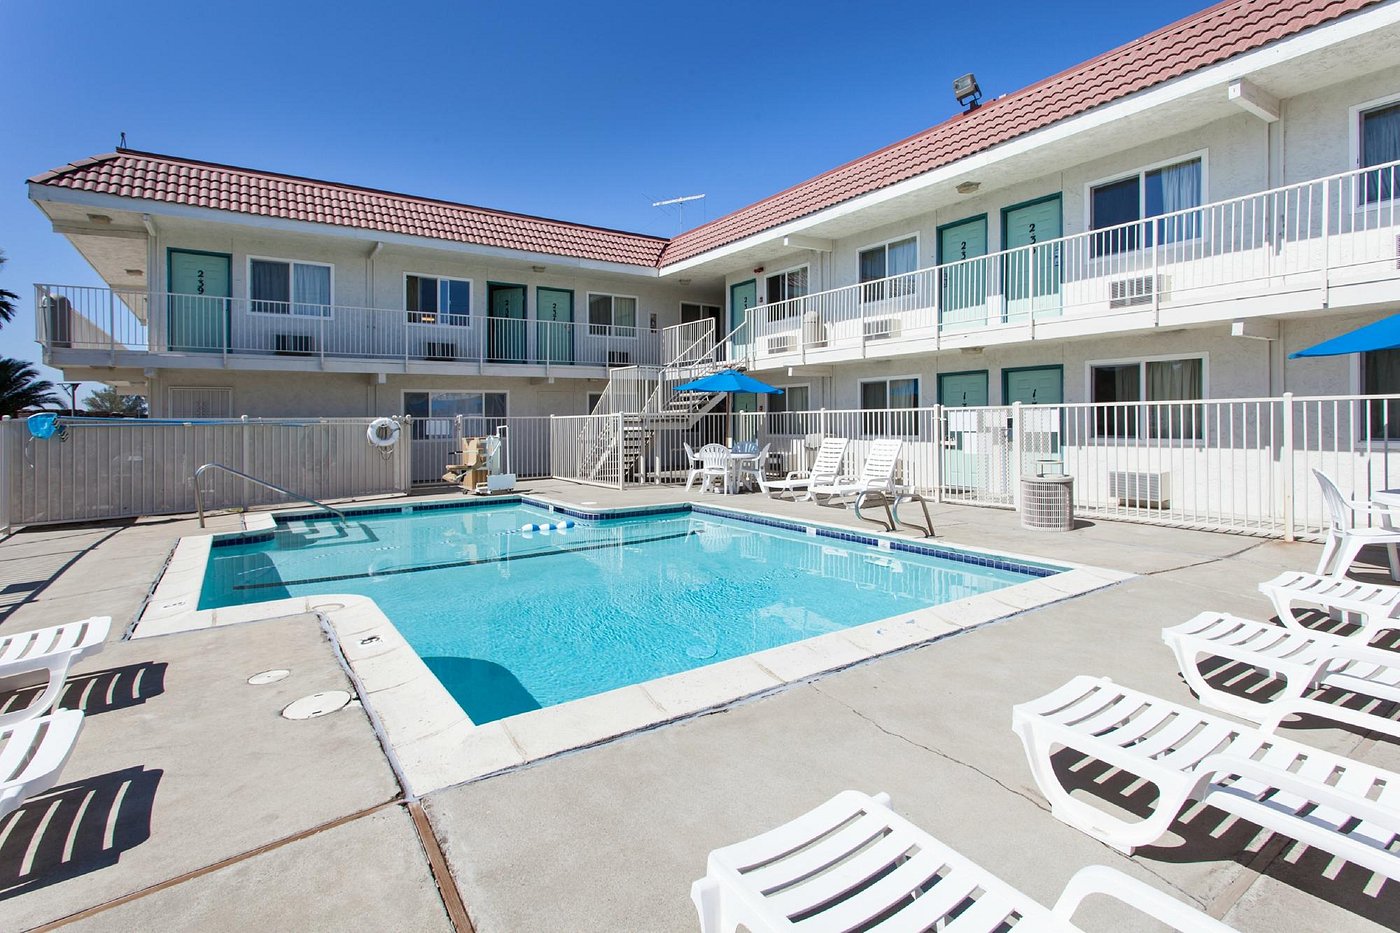 Motel 6 Stockton Charter Way West UPDATED Prices, Reviews & Photos